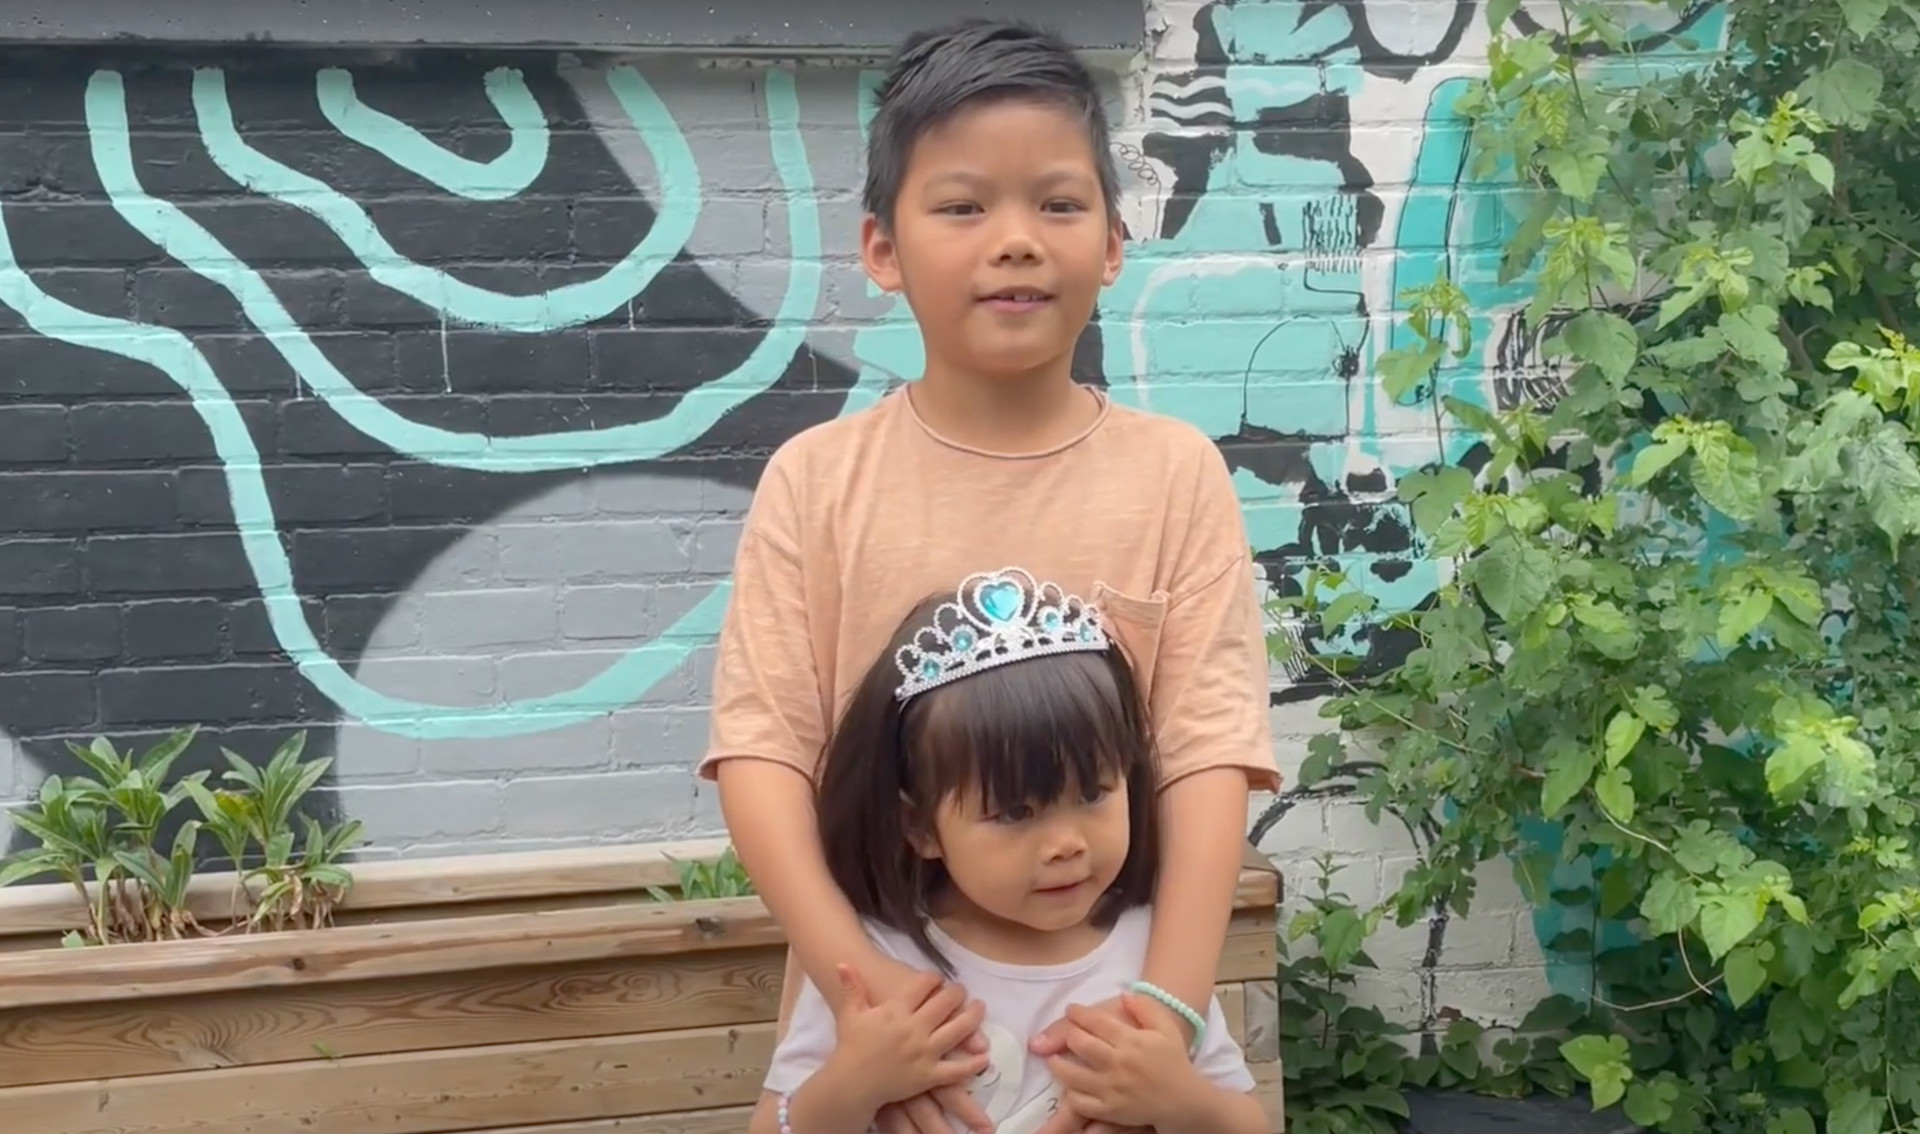 In this preview image of a video, a little girl with a crown is being hugged from behind by her brother. Both kids are outdoors in front of a wall with a mural and some green leaves on a bush or tree.